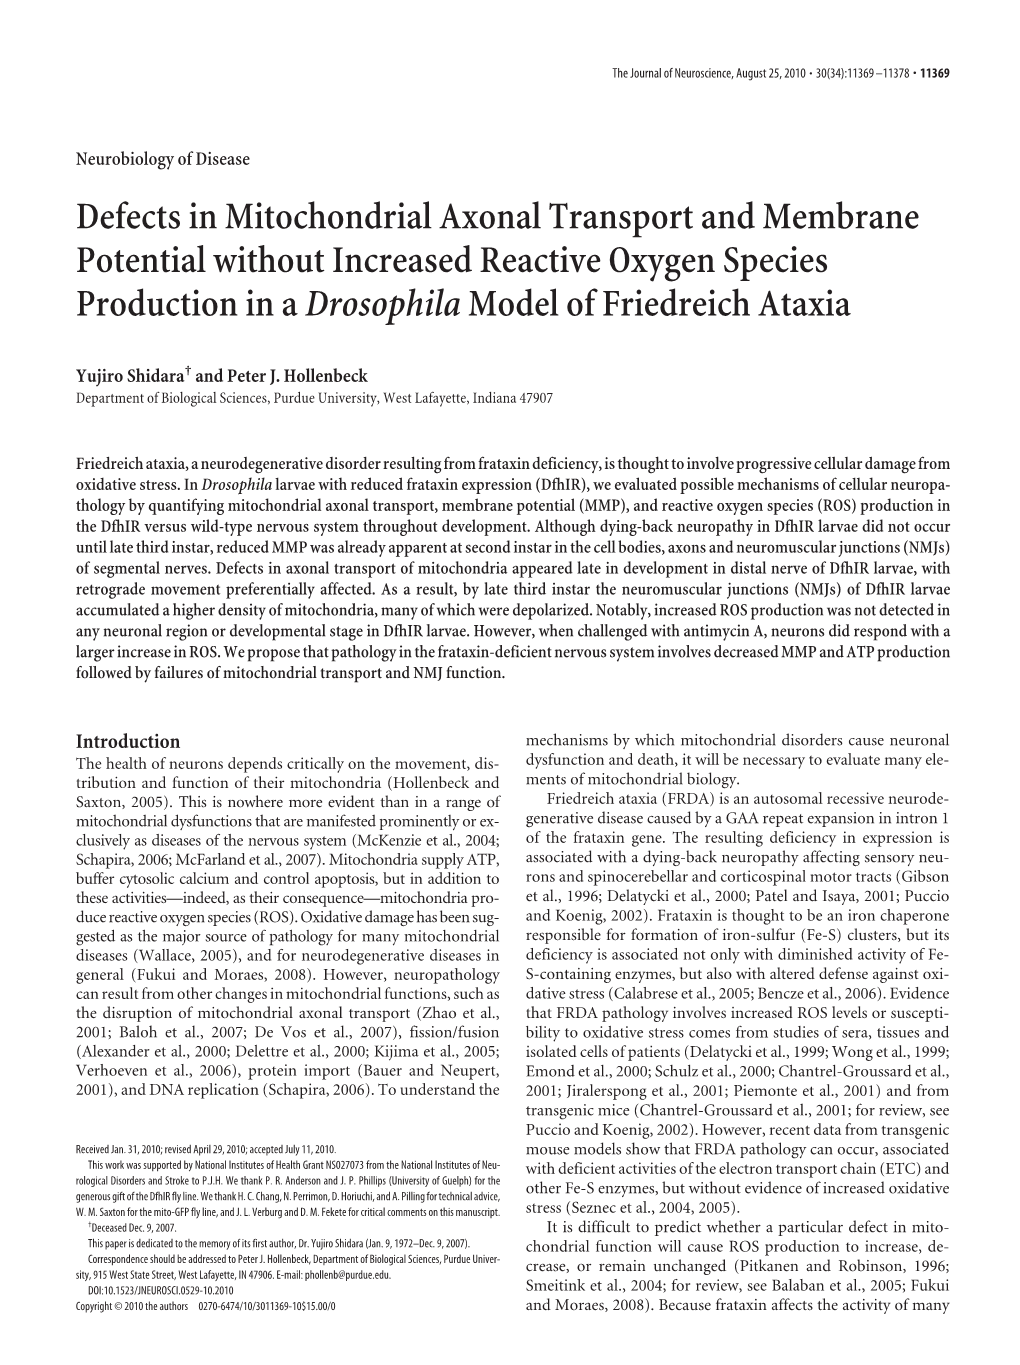 Defects in Mitochondrial Axonal Transport and Membrane Potential Without Increased Reactive Oxygen Species Production in Adrosop